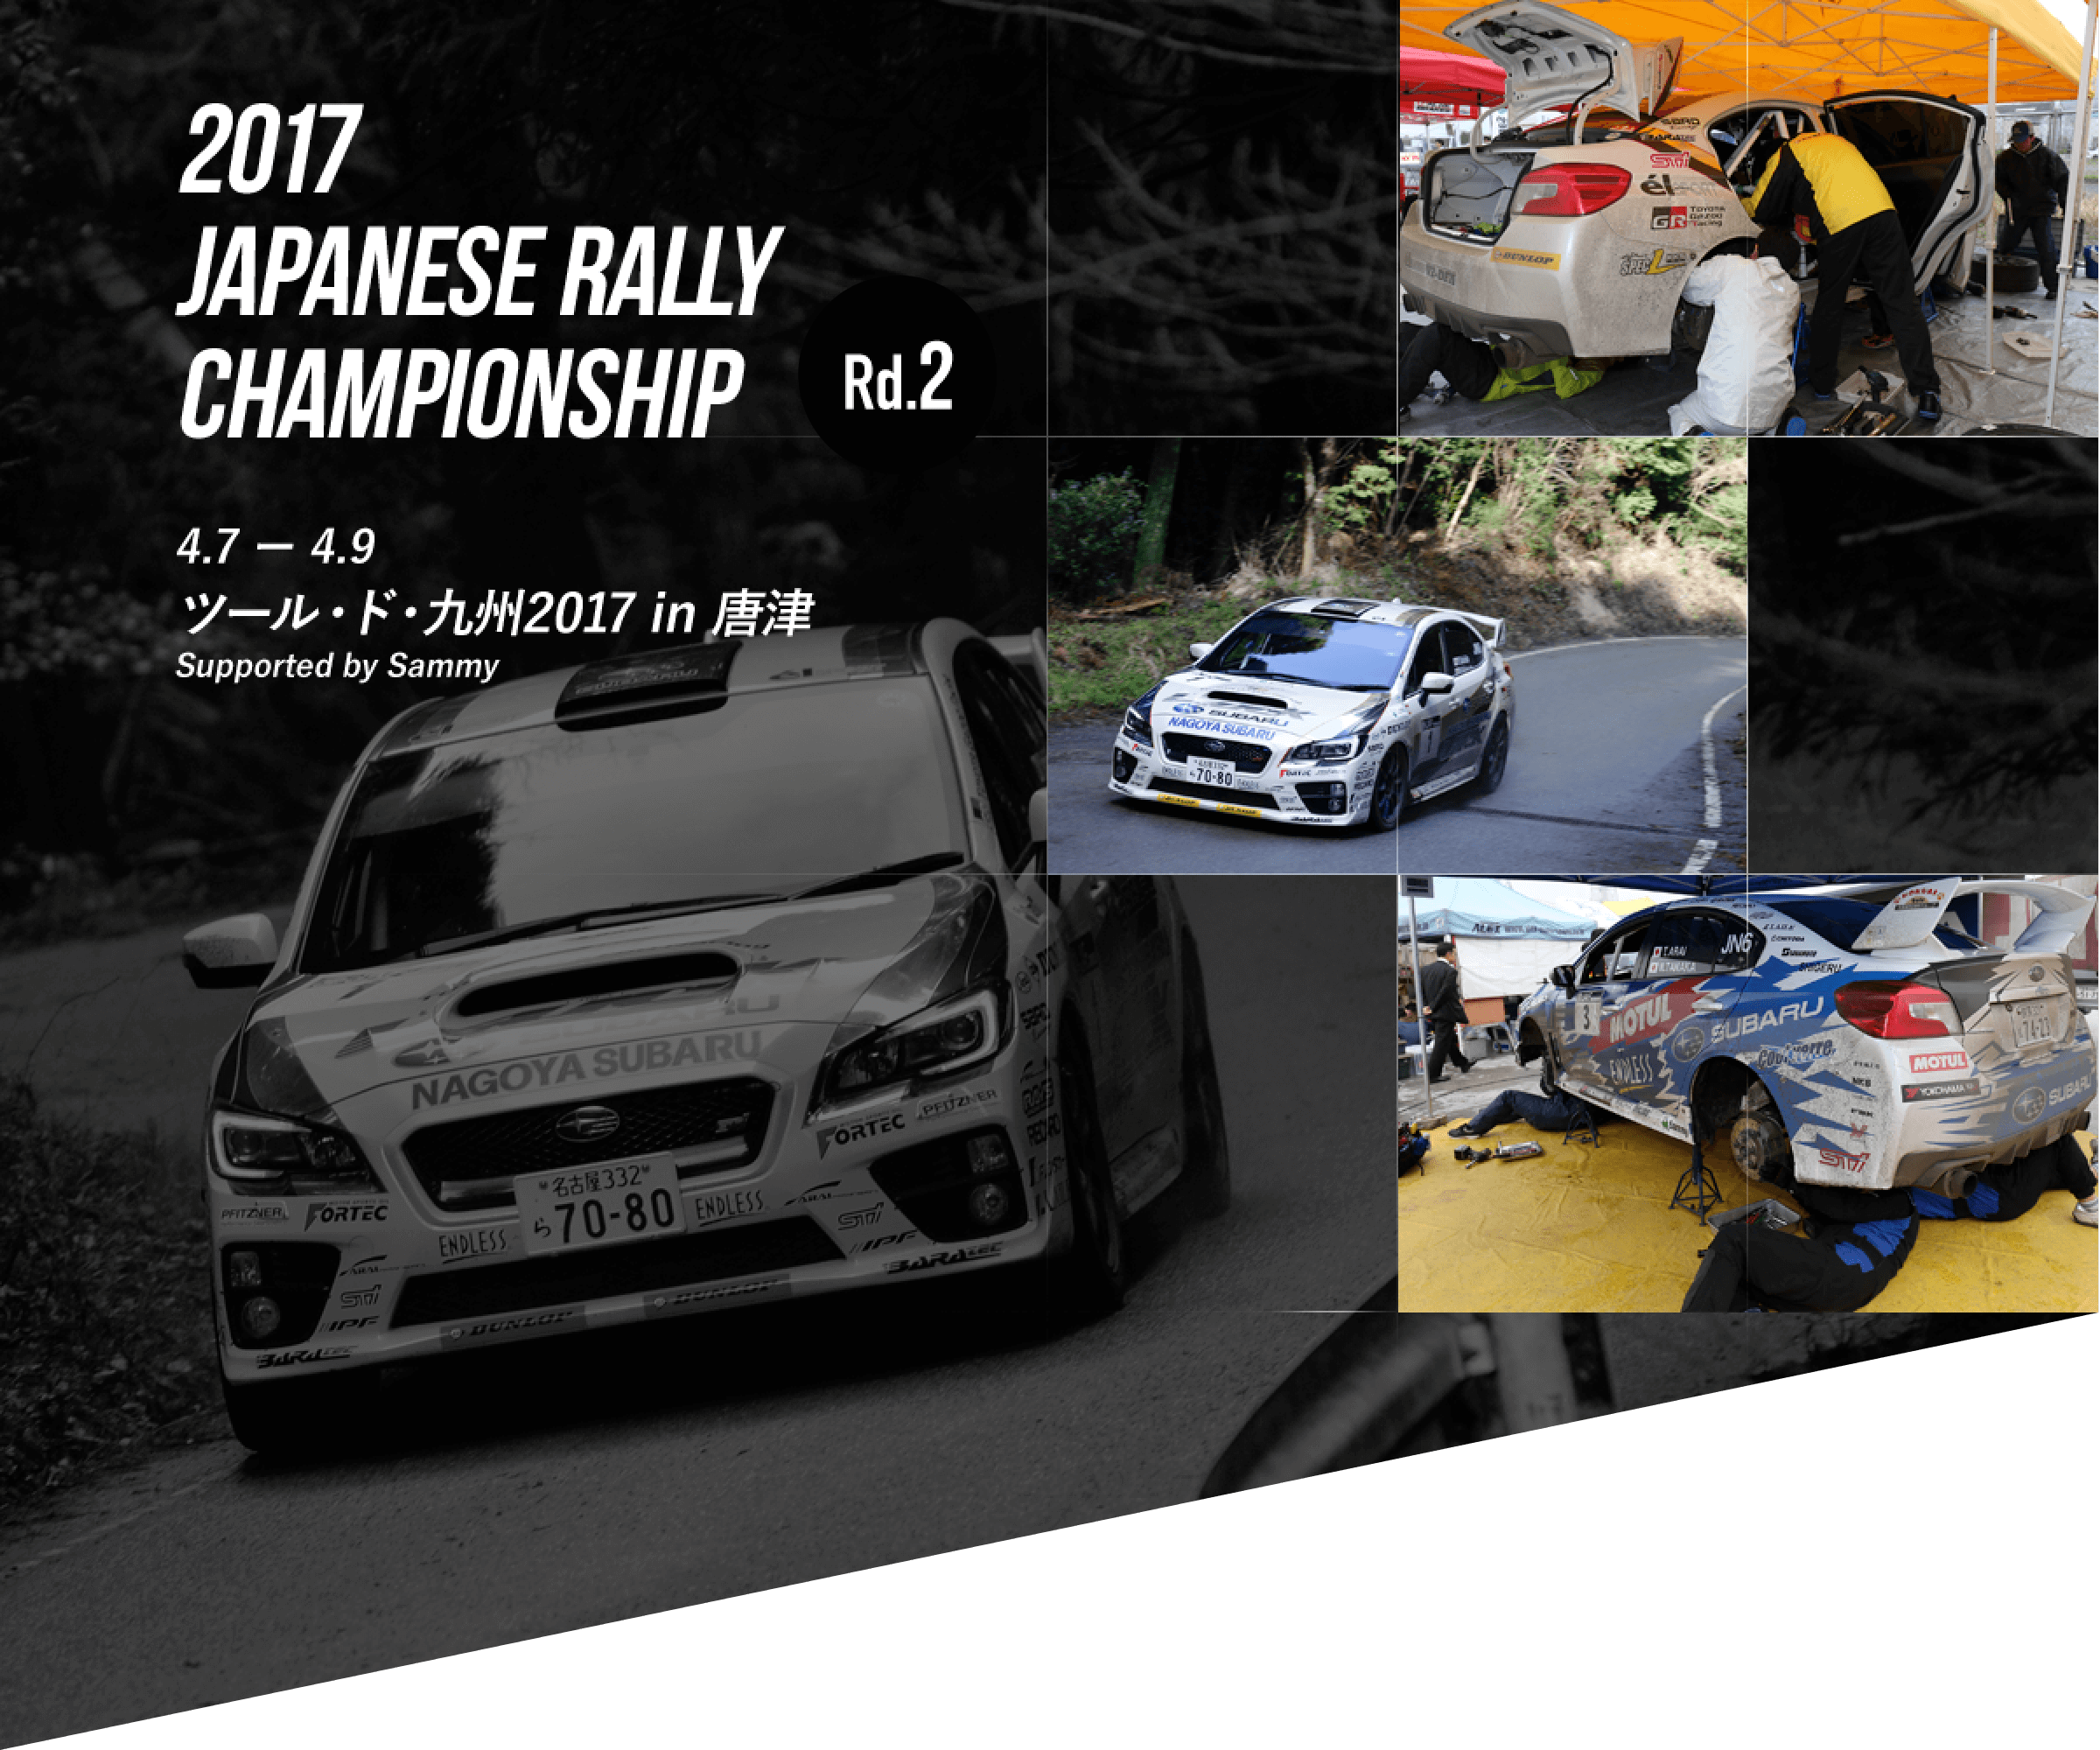 2017 JAPANESE RALLY CHAMPIONSHIP Rd.2 4.7-9ツール・ド・九州2017 in 唐津 Supported by Sammy